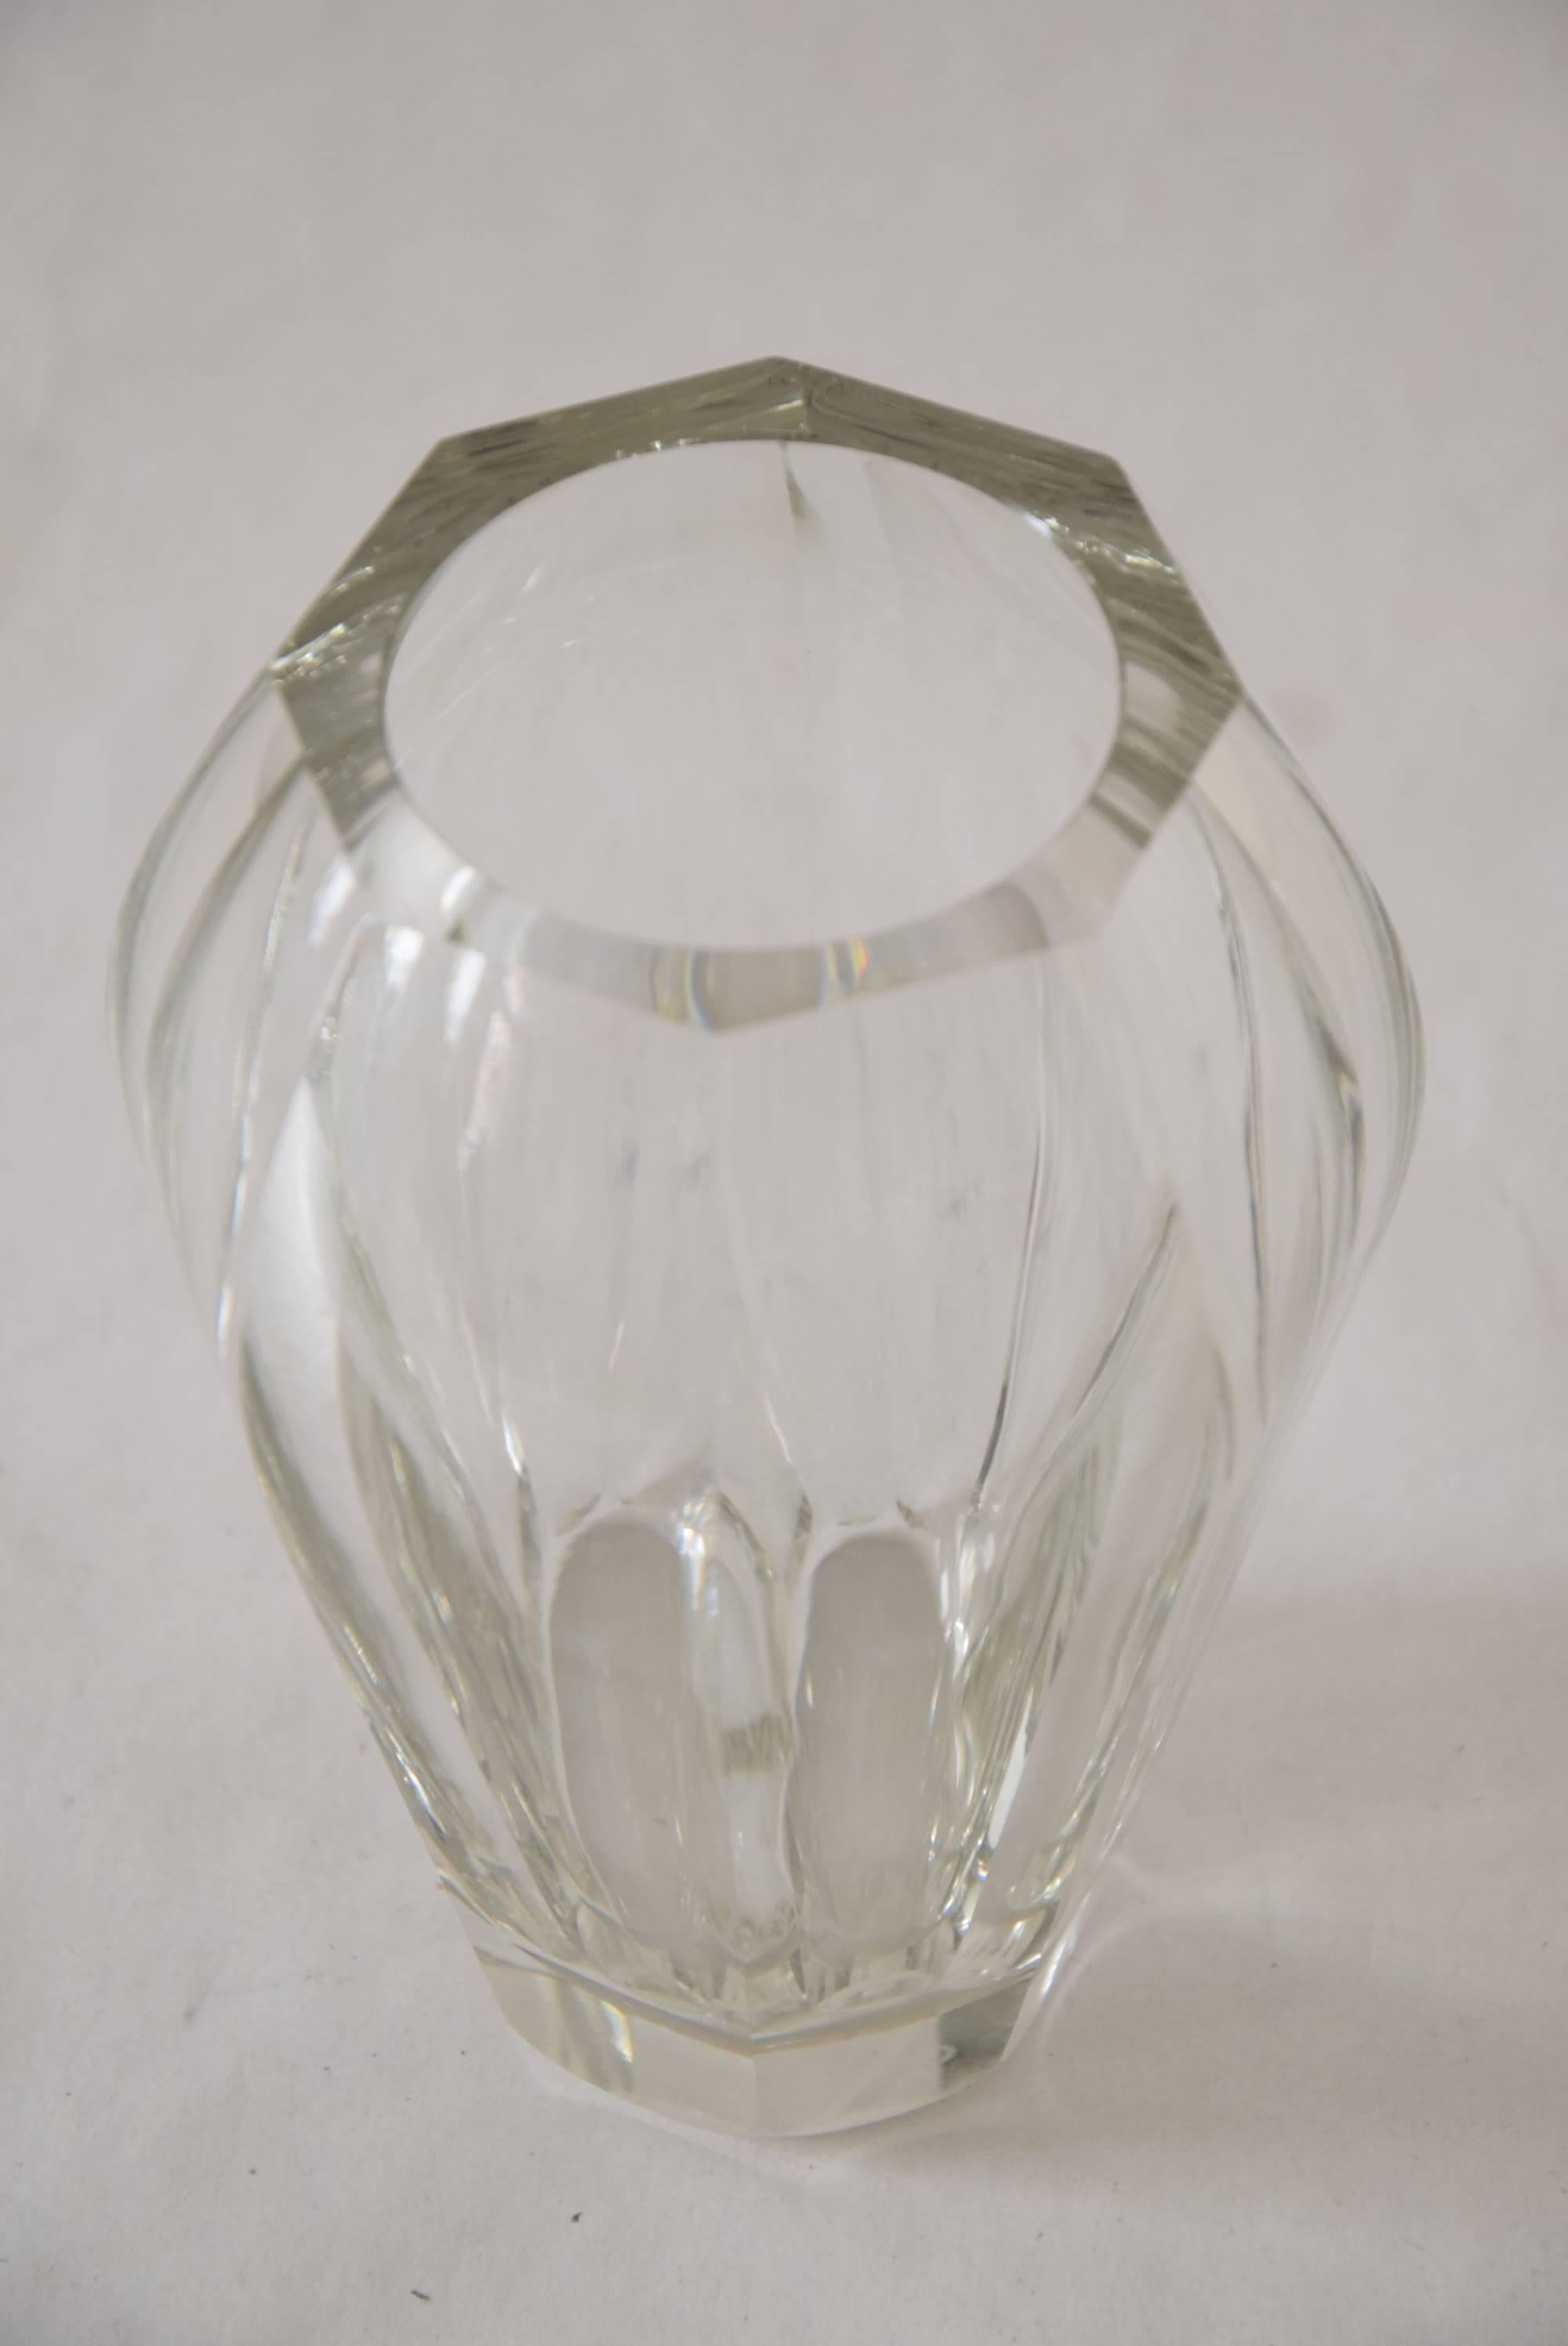 Signed cut art glass 1920s vase by Ludwig Moser & Söhne, Czechoslovakia! 
company Ludwig Moser & Sohne, Meierhofen bei Karlsbad, Czechoslovakia.
Traces of wear at the underside depend on its age.
Signed 1857-1957 Moser Made in